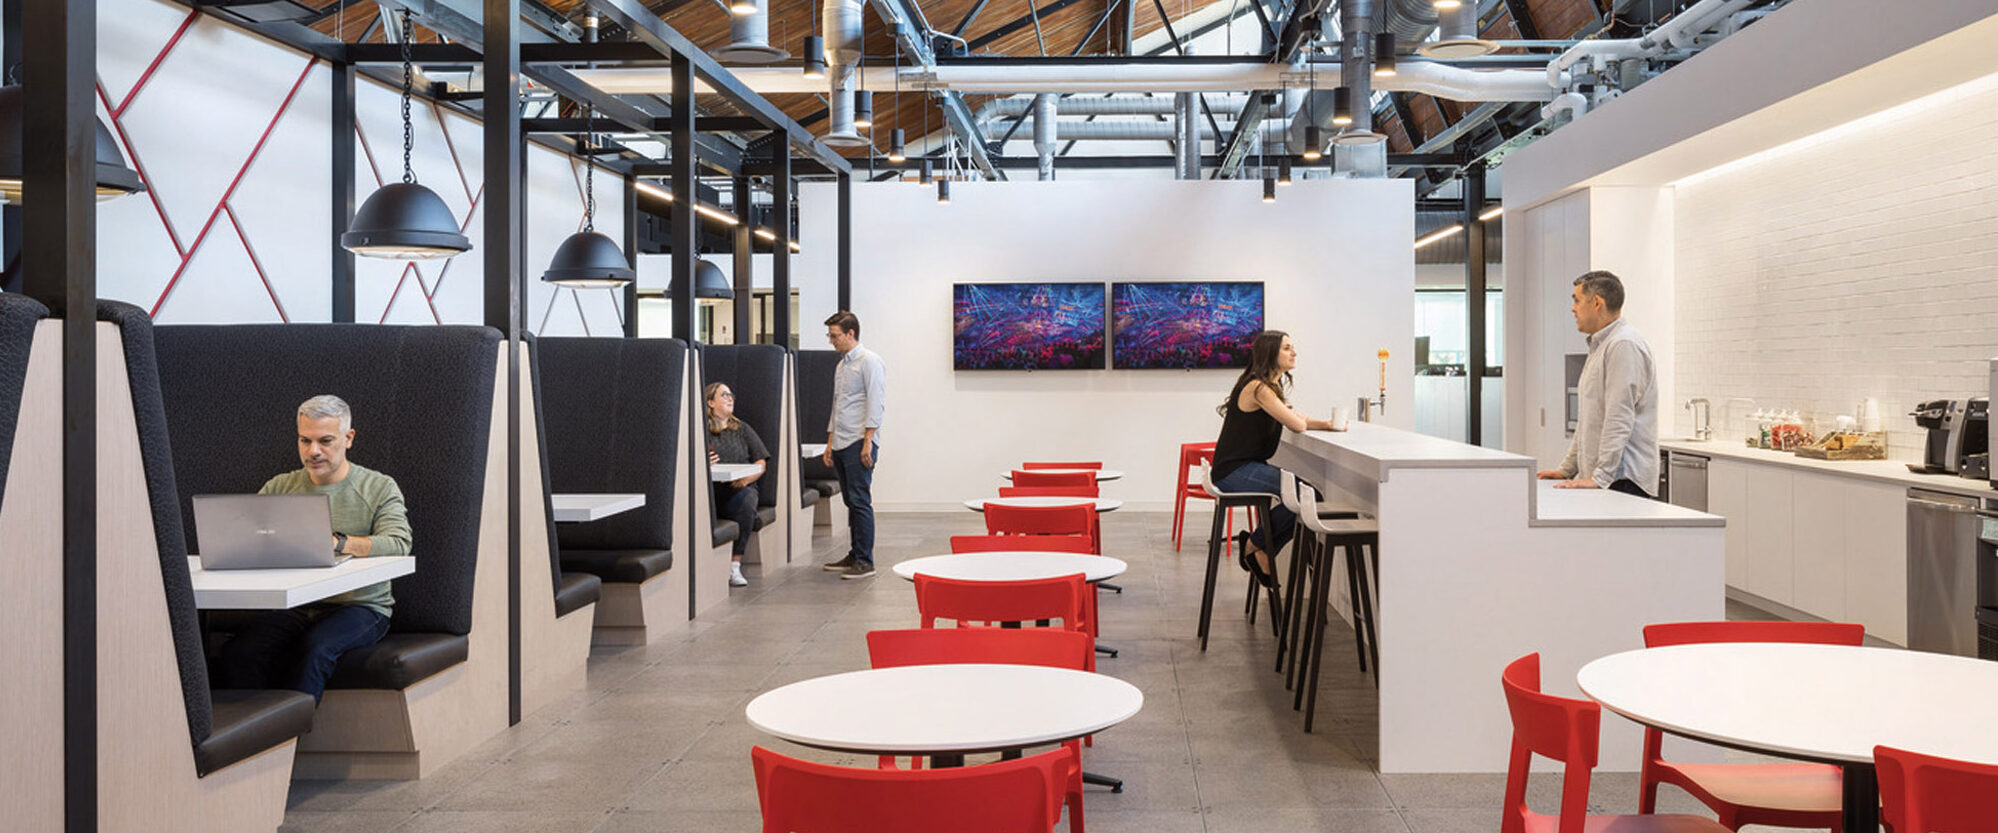 Modern open-plan office space featuring a high ceiling with exposed ductwork, sleek red tables and chairs, private cubicles with gray acoustic panels, and a centralized kitchen area with bar seating, under warm pendant lighting.